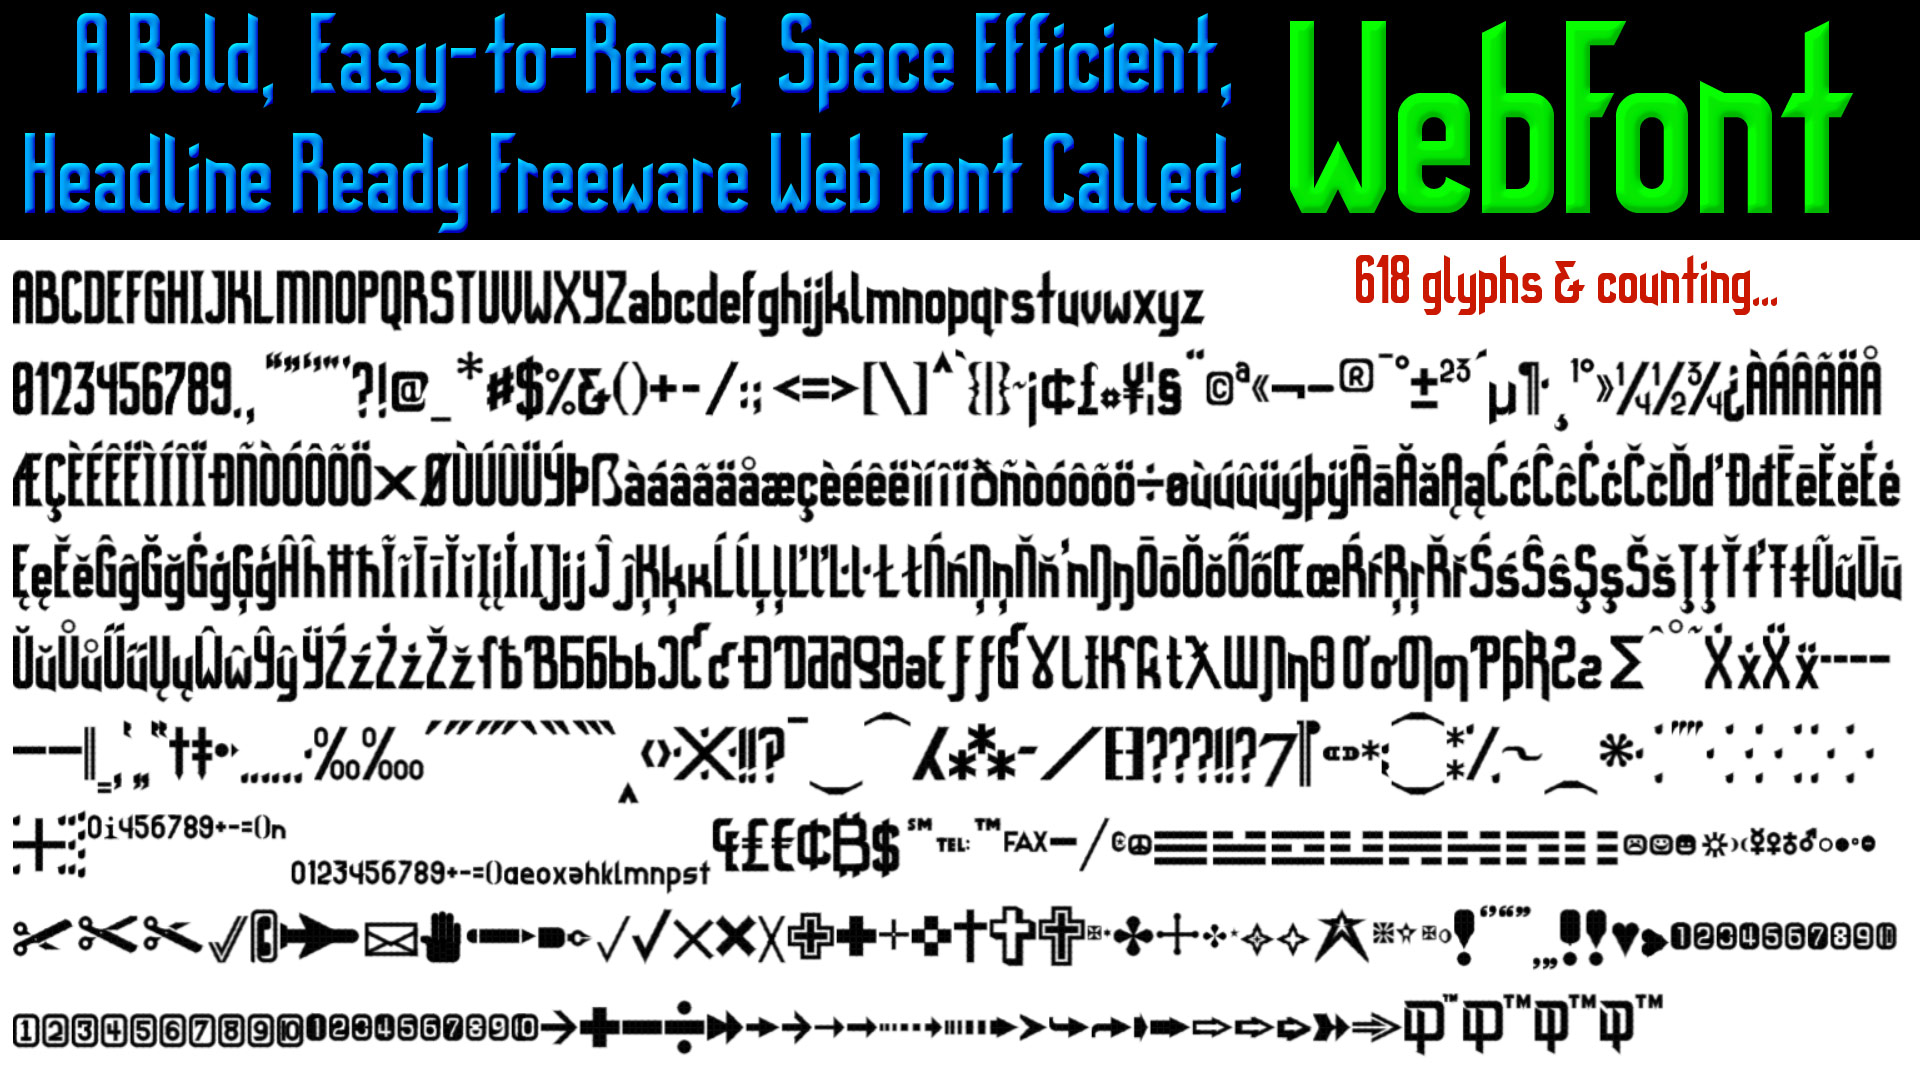 Full character set of 'WebFont' by Doug Peters, an SIL Open Font License Freeware Font for Public Use.